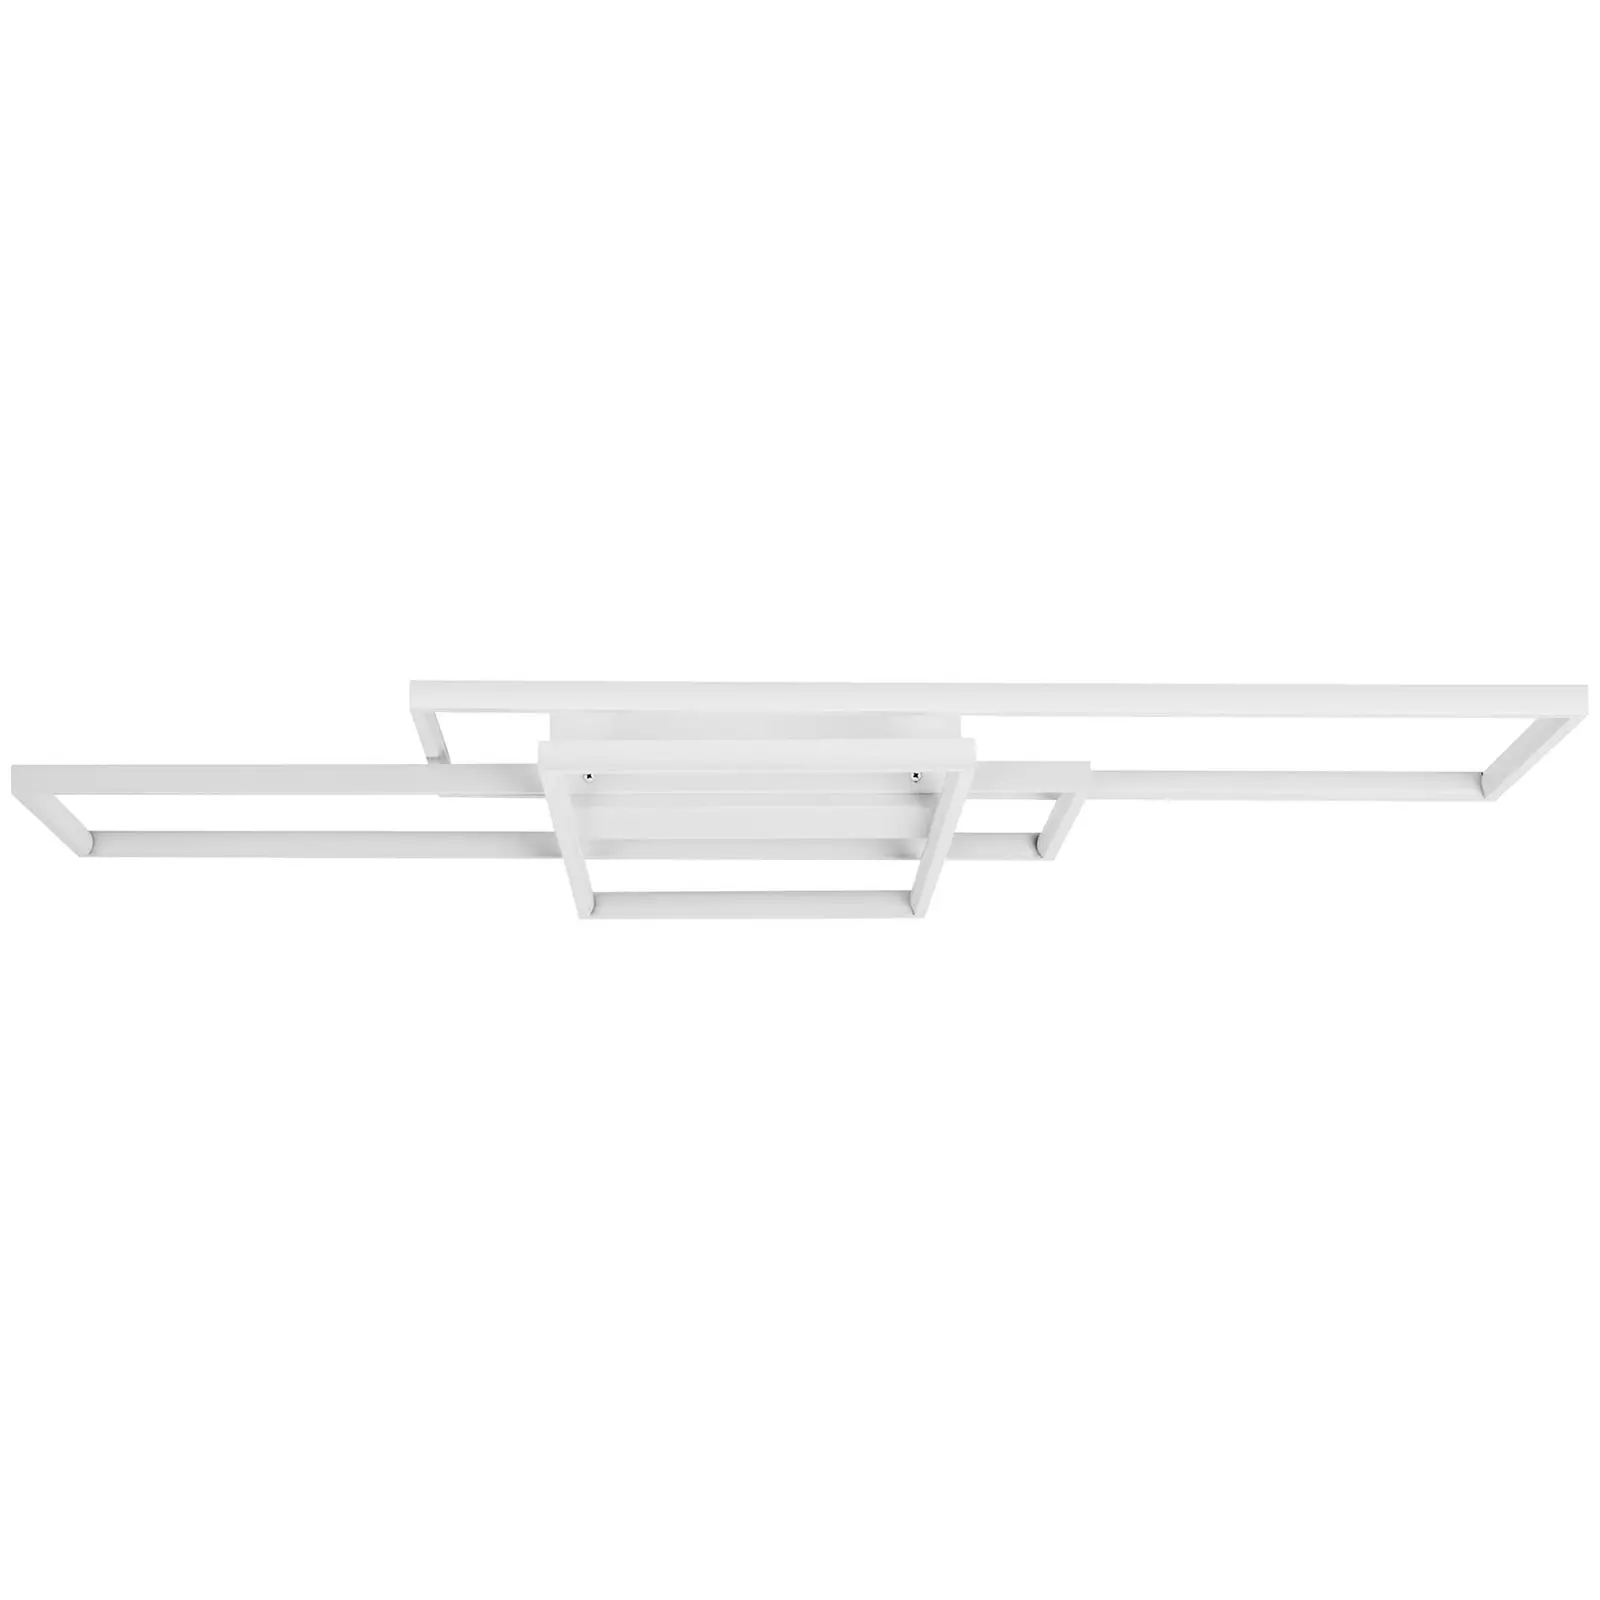 Ceiling Light - 3 intersecting rectangles - remote control